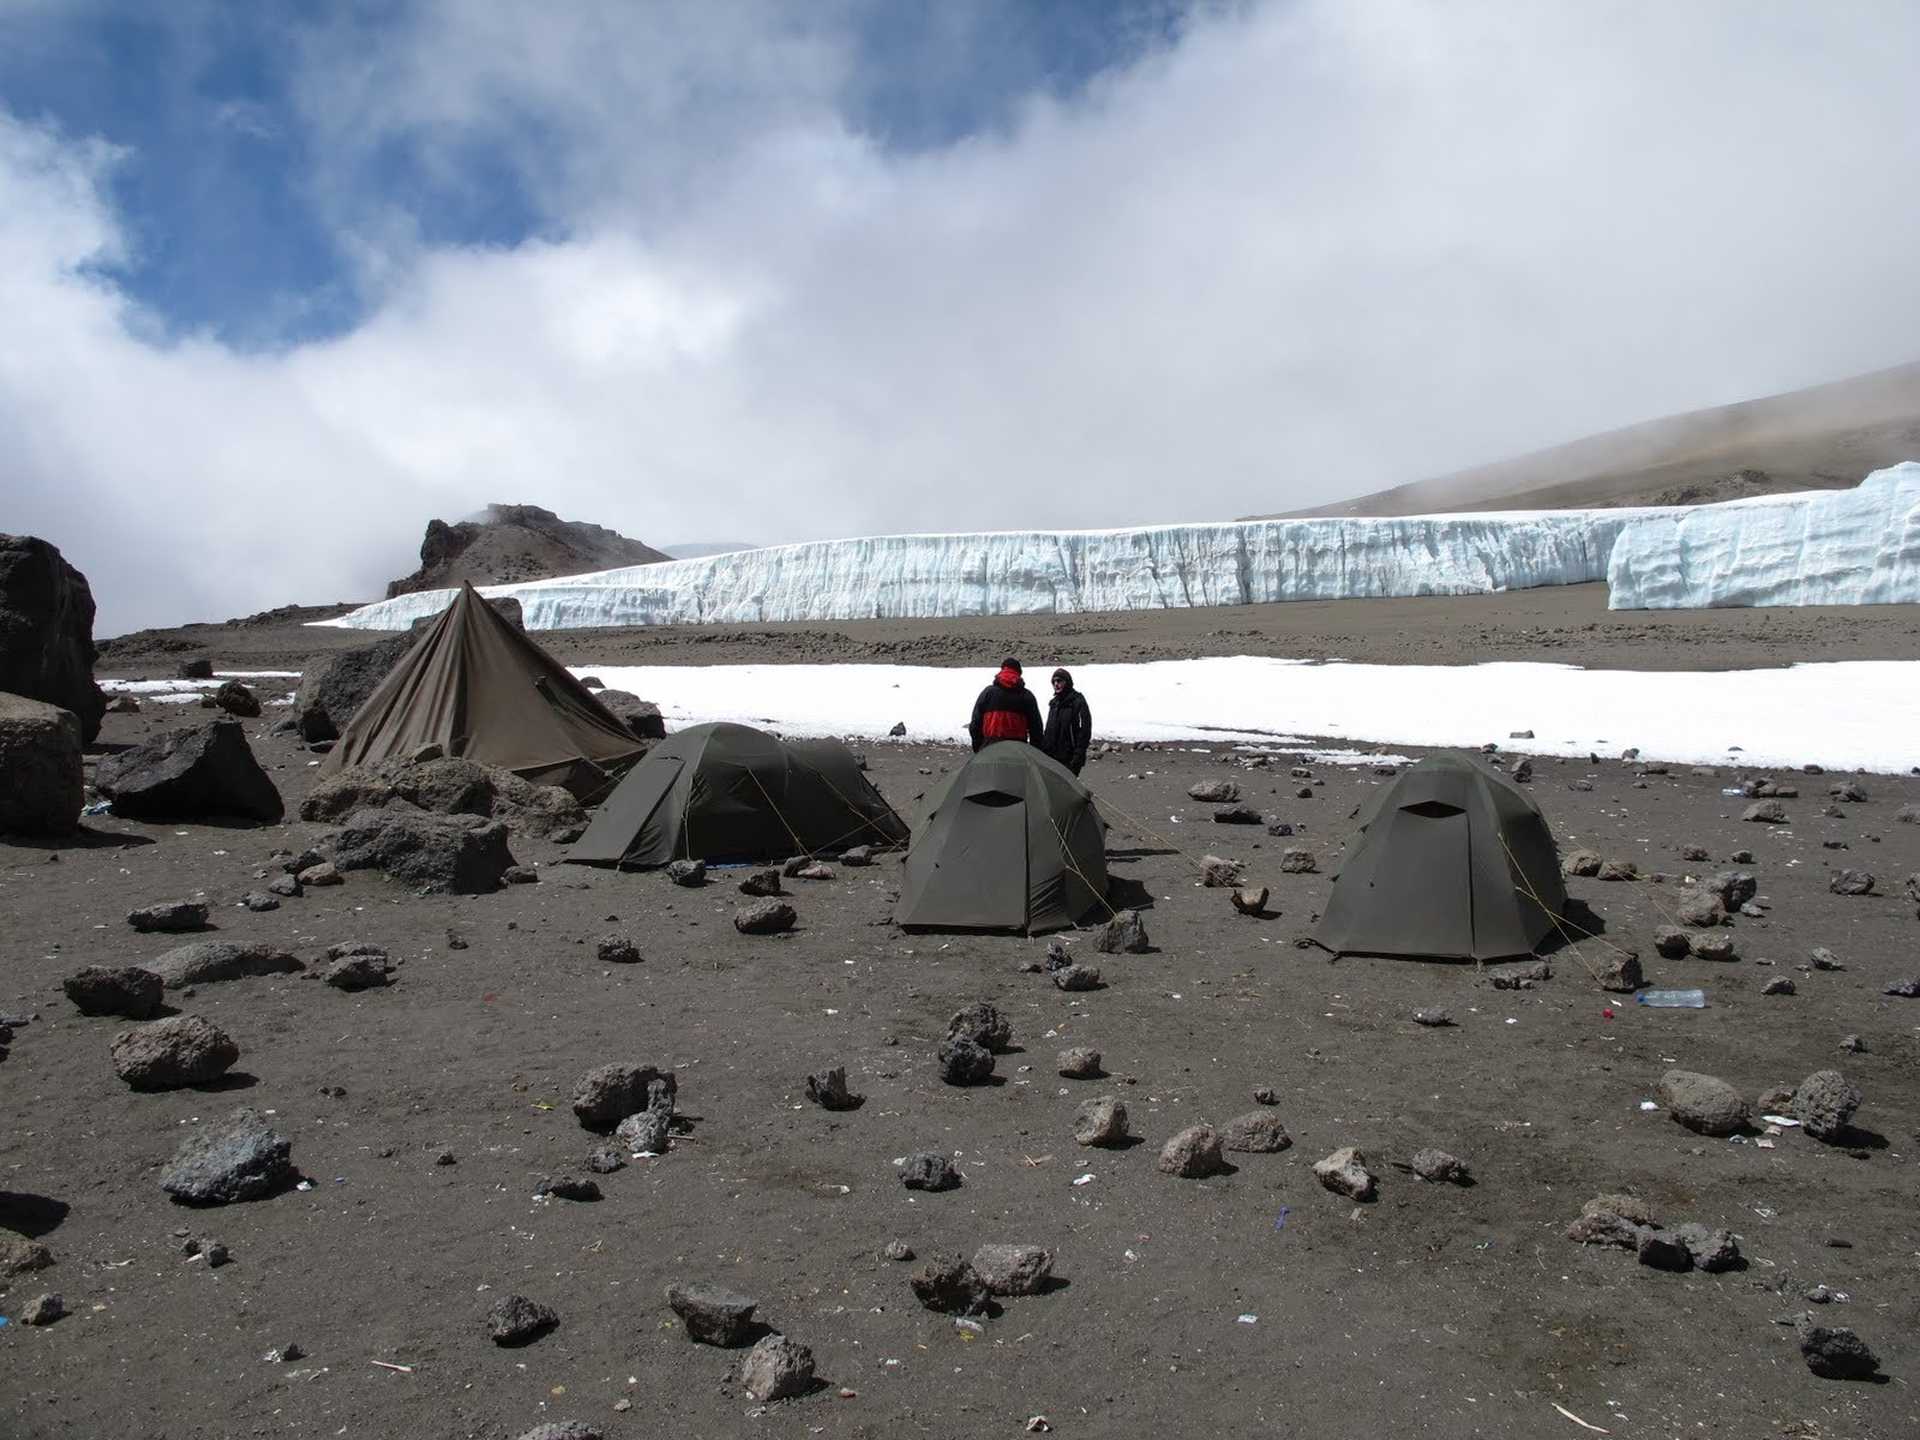 Crater camp on the Lemosho route